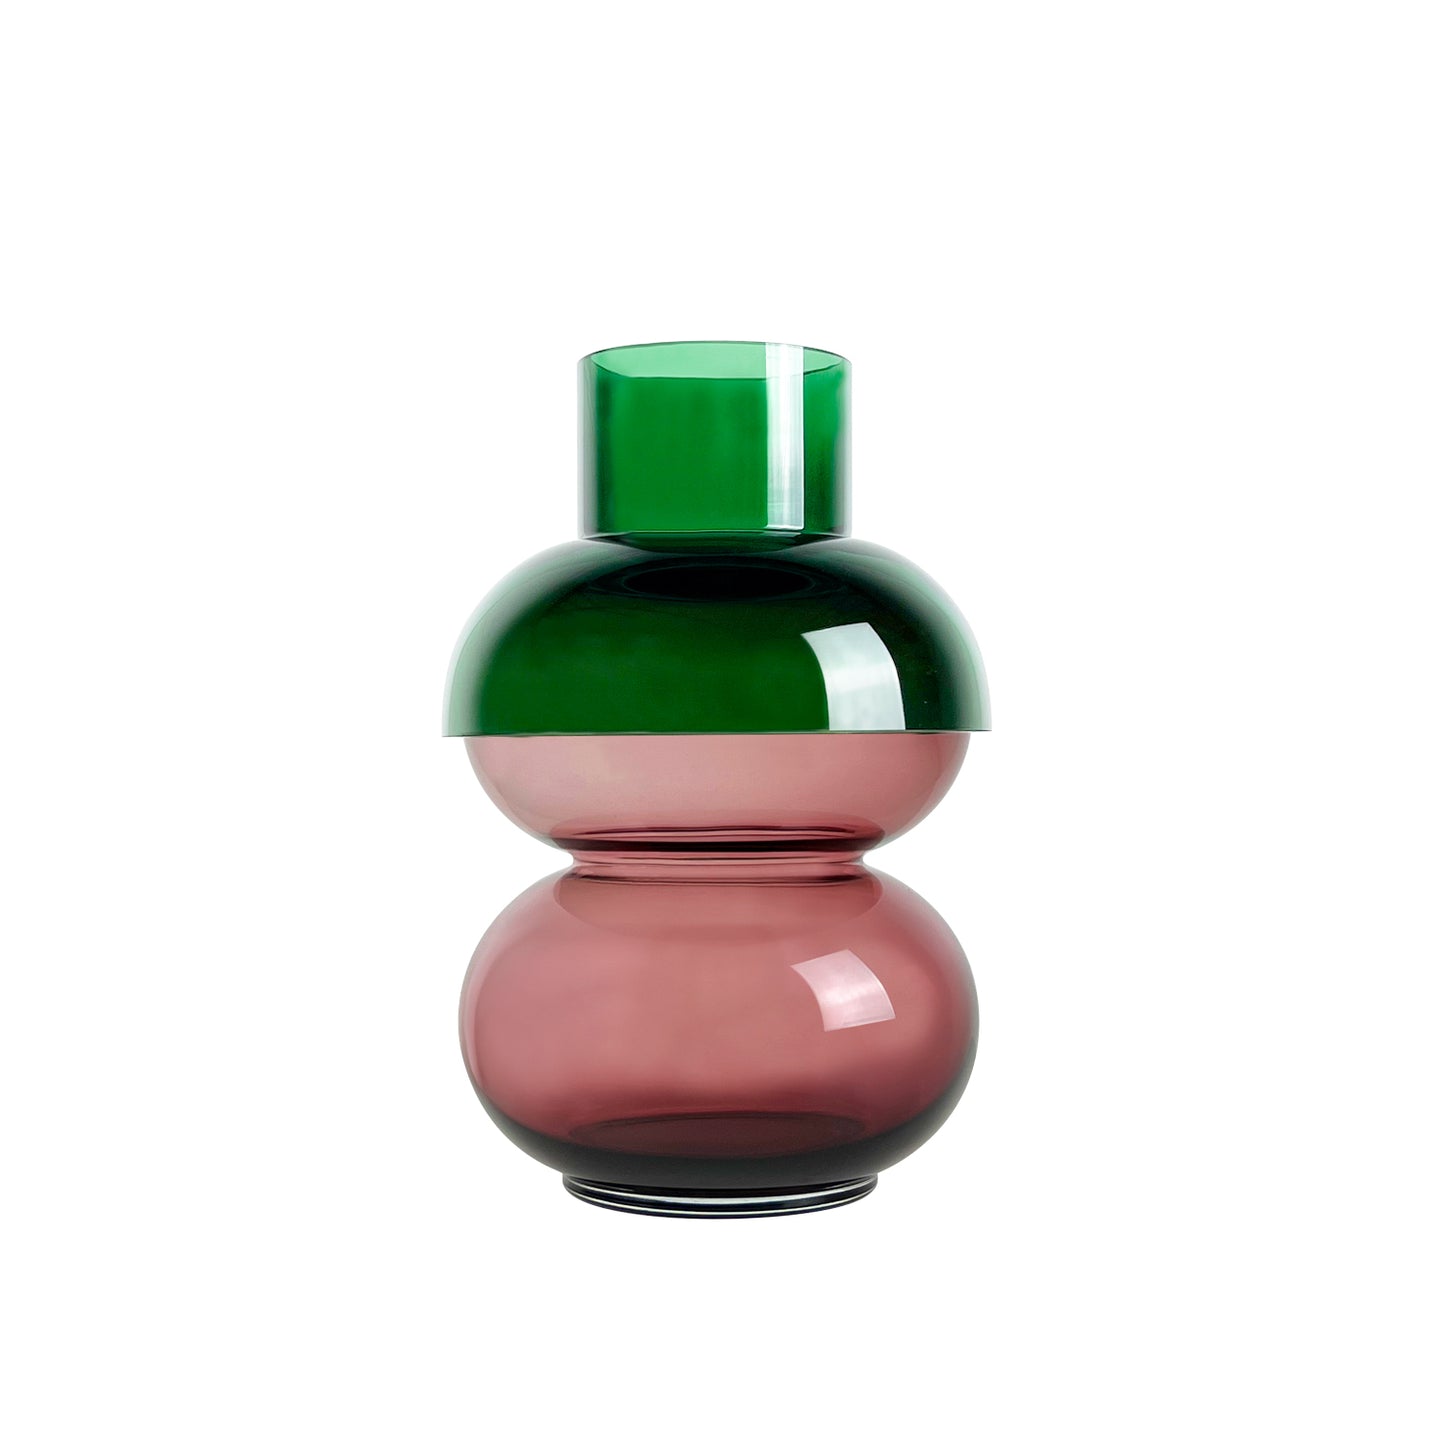 Cloudnola Enchanting Bubble Vase in Green and Pink